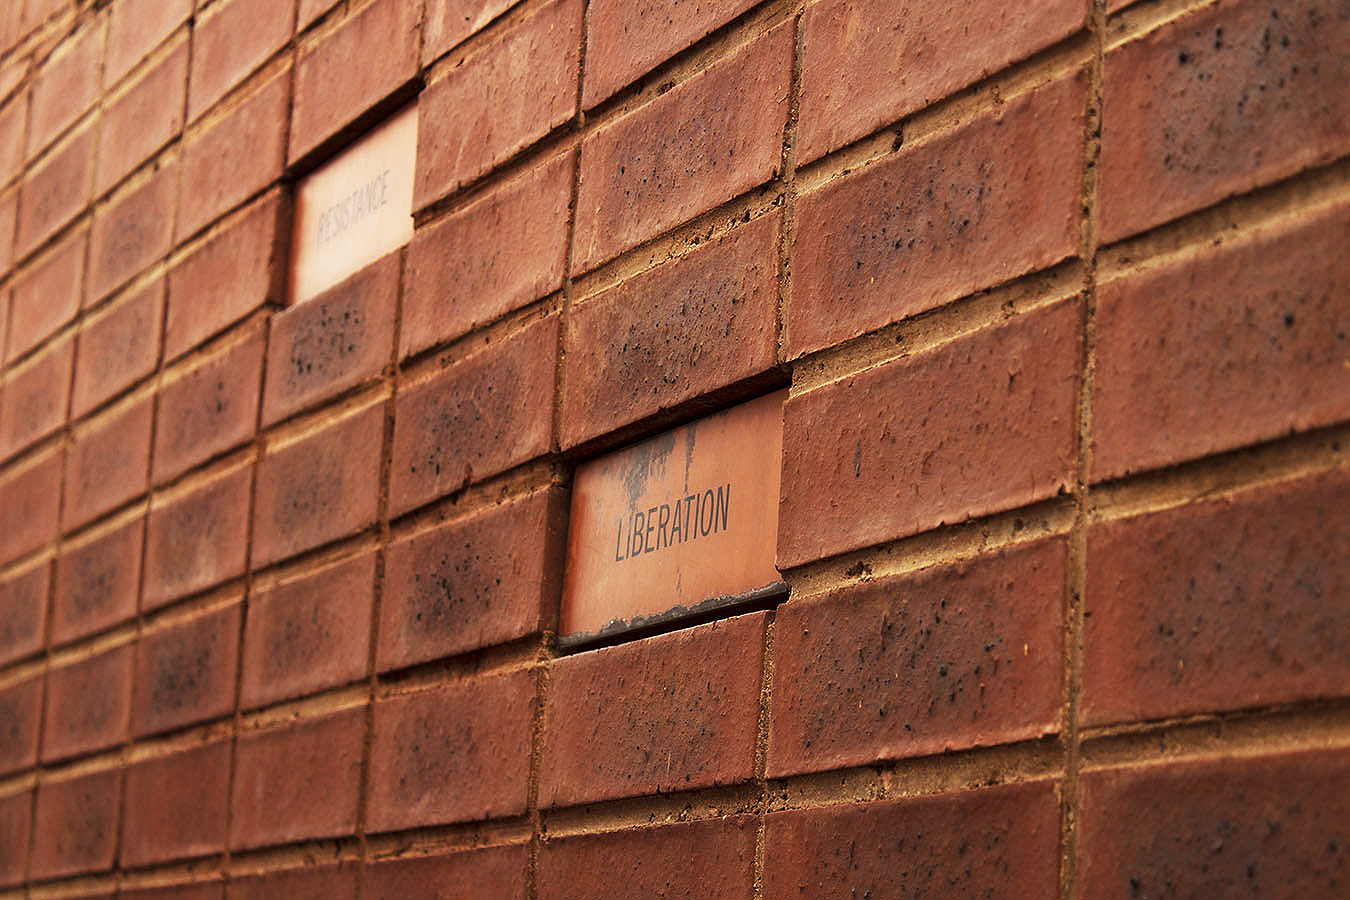 Words inscribed on the wall of Nelson Mandela’s house in Johannesburg